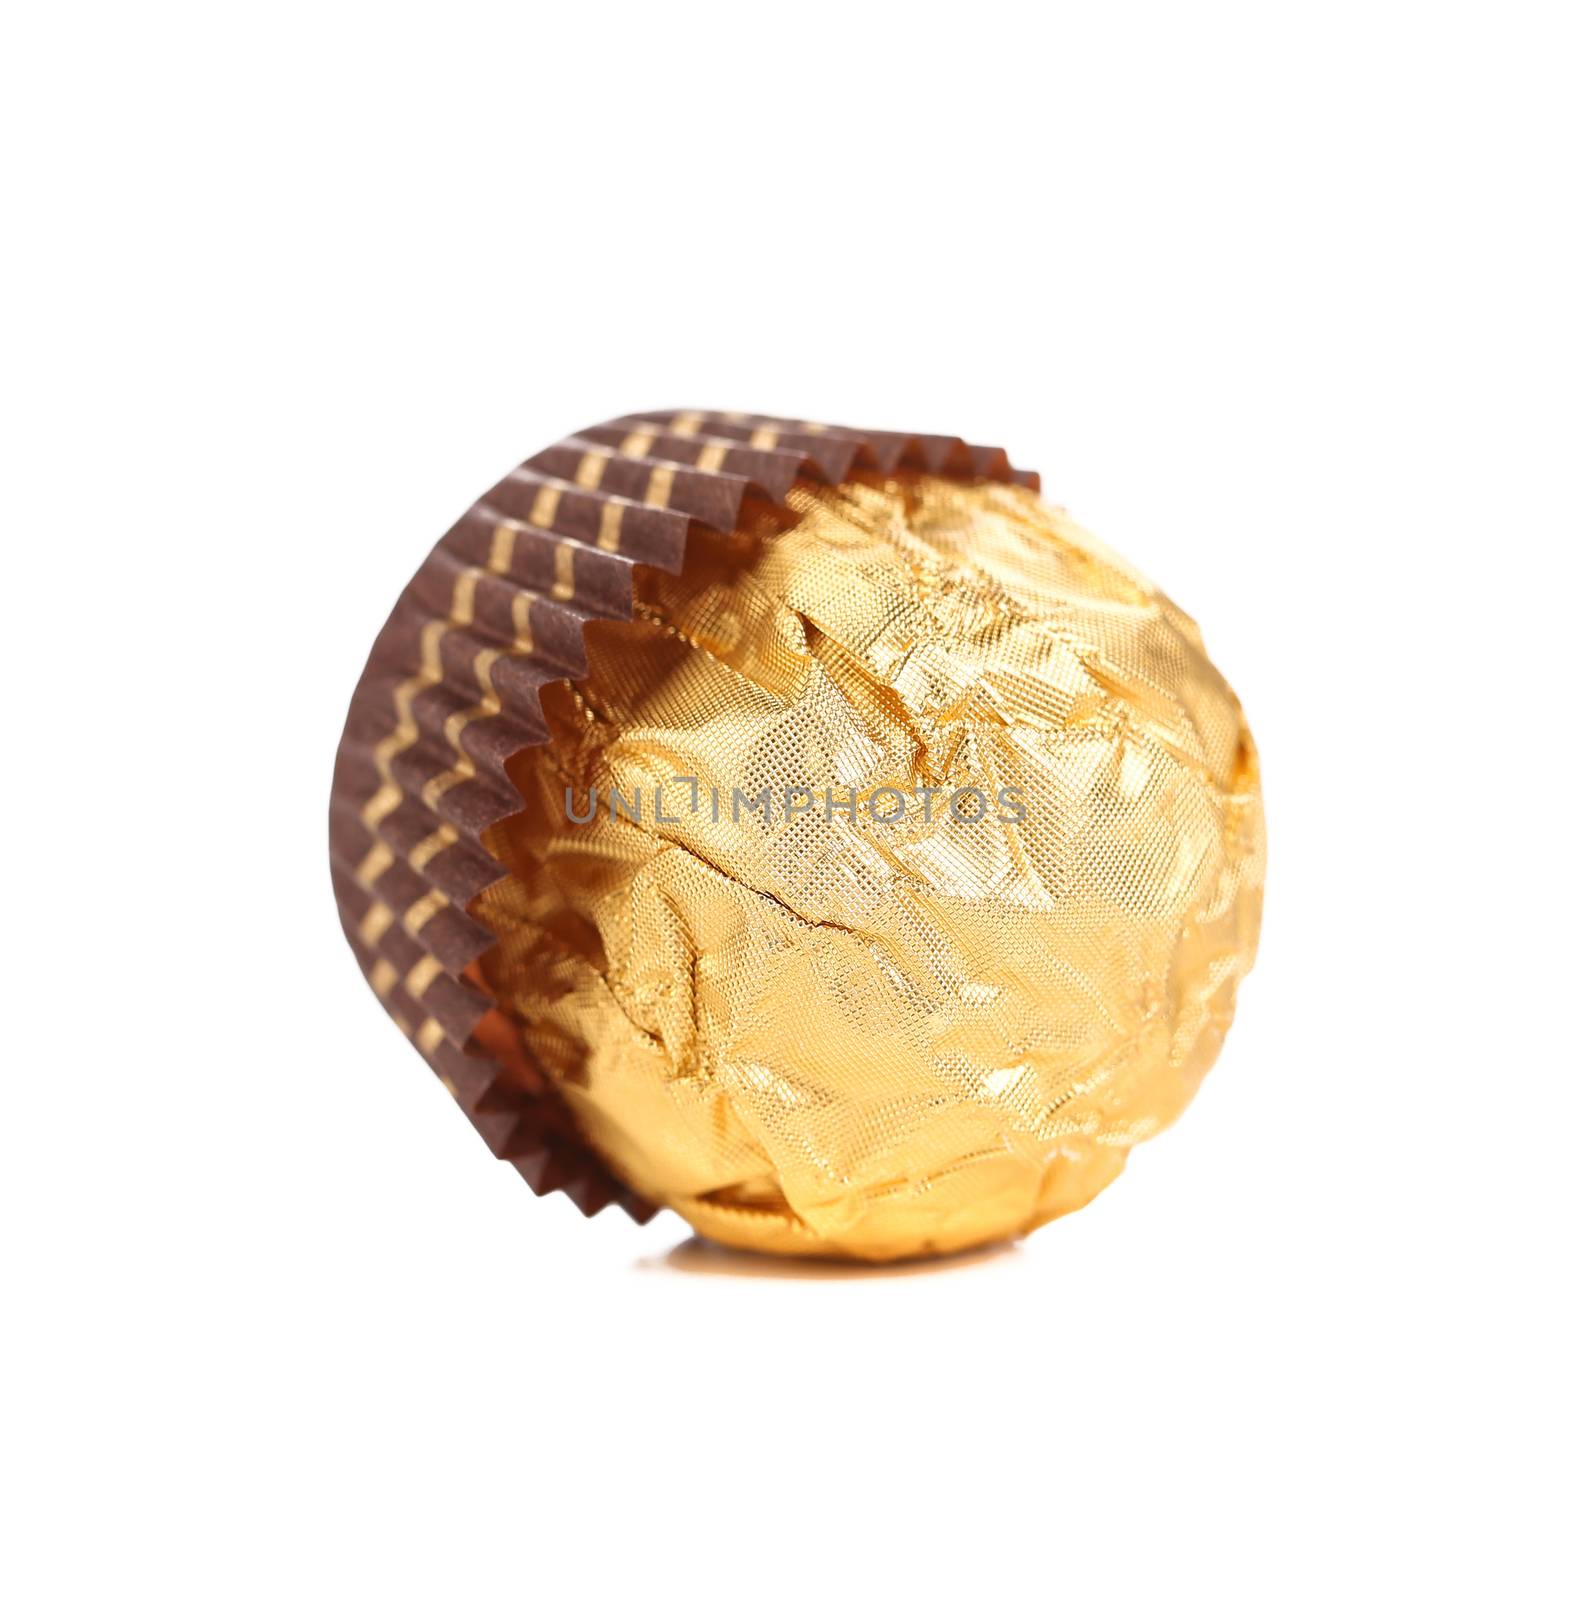 Delicious gold foiled bonbon. Isolated on a white background.